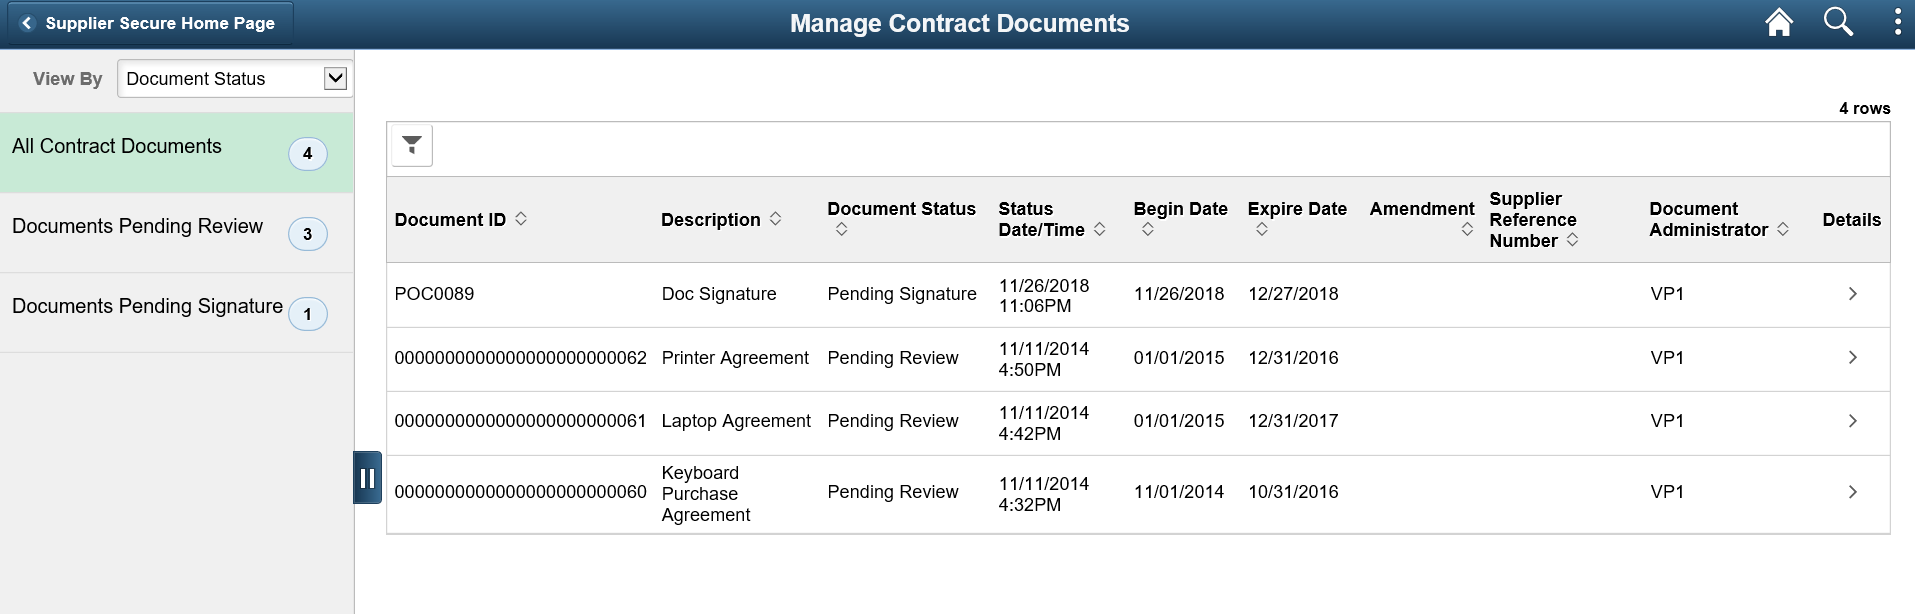 Manage Contract Documents page